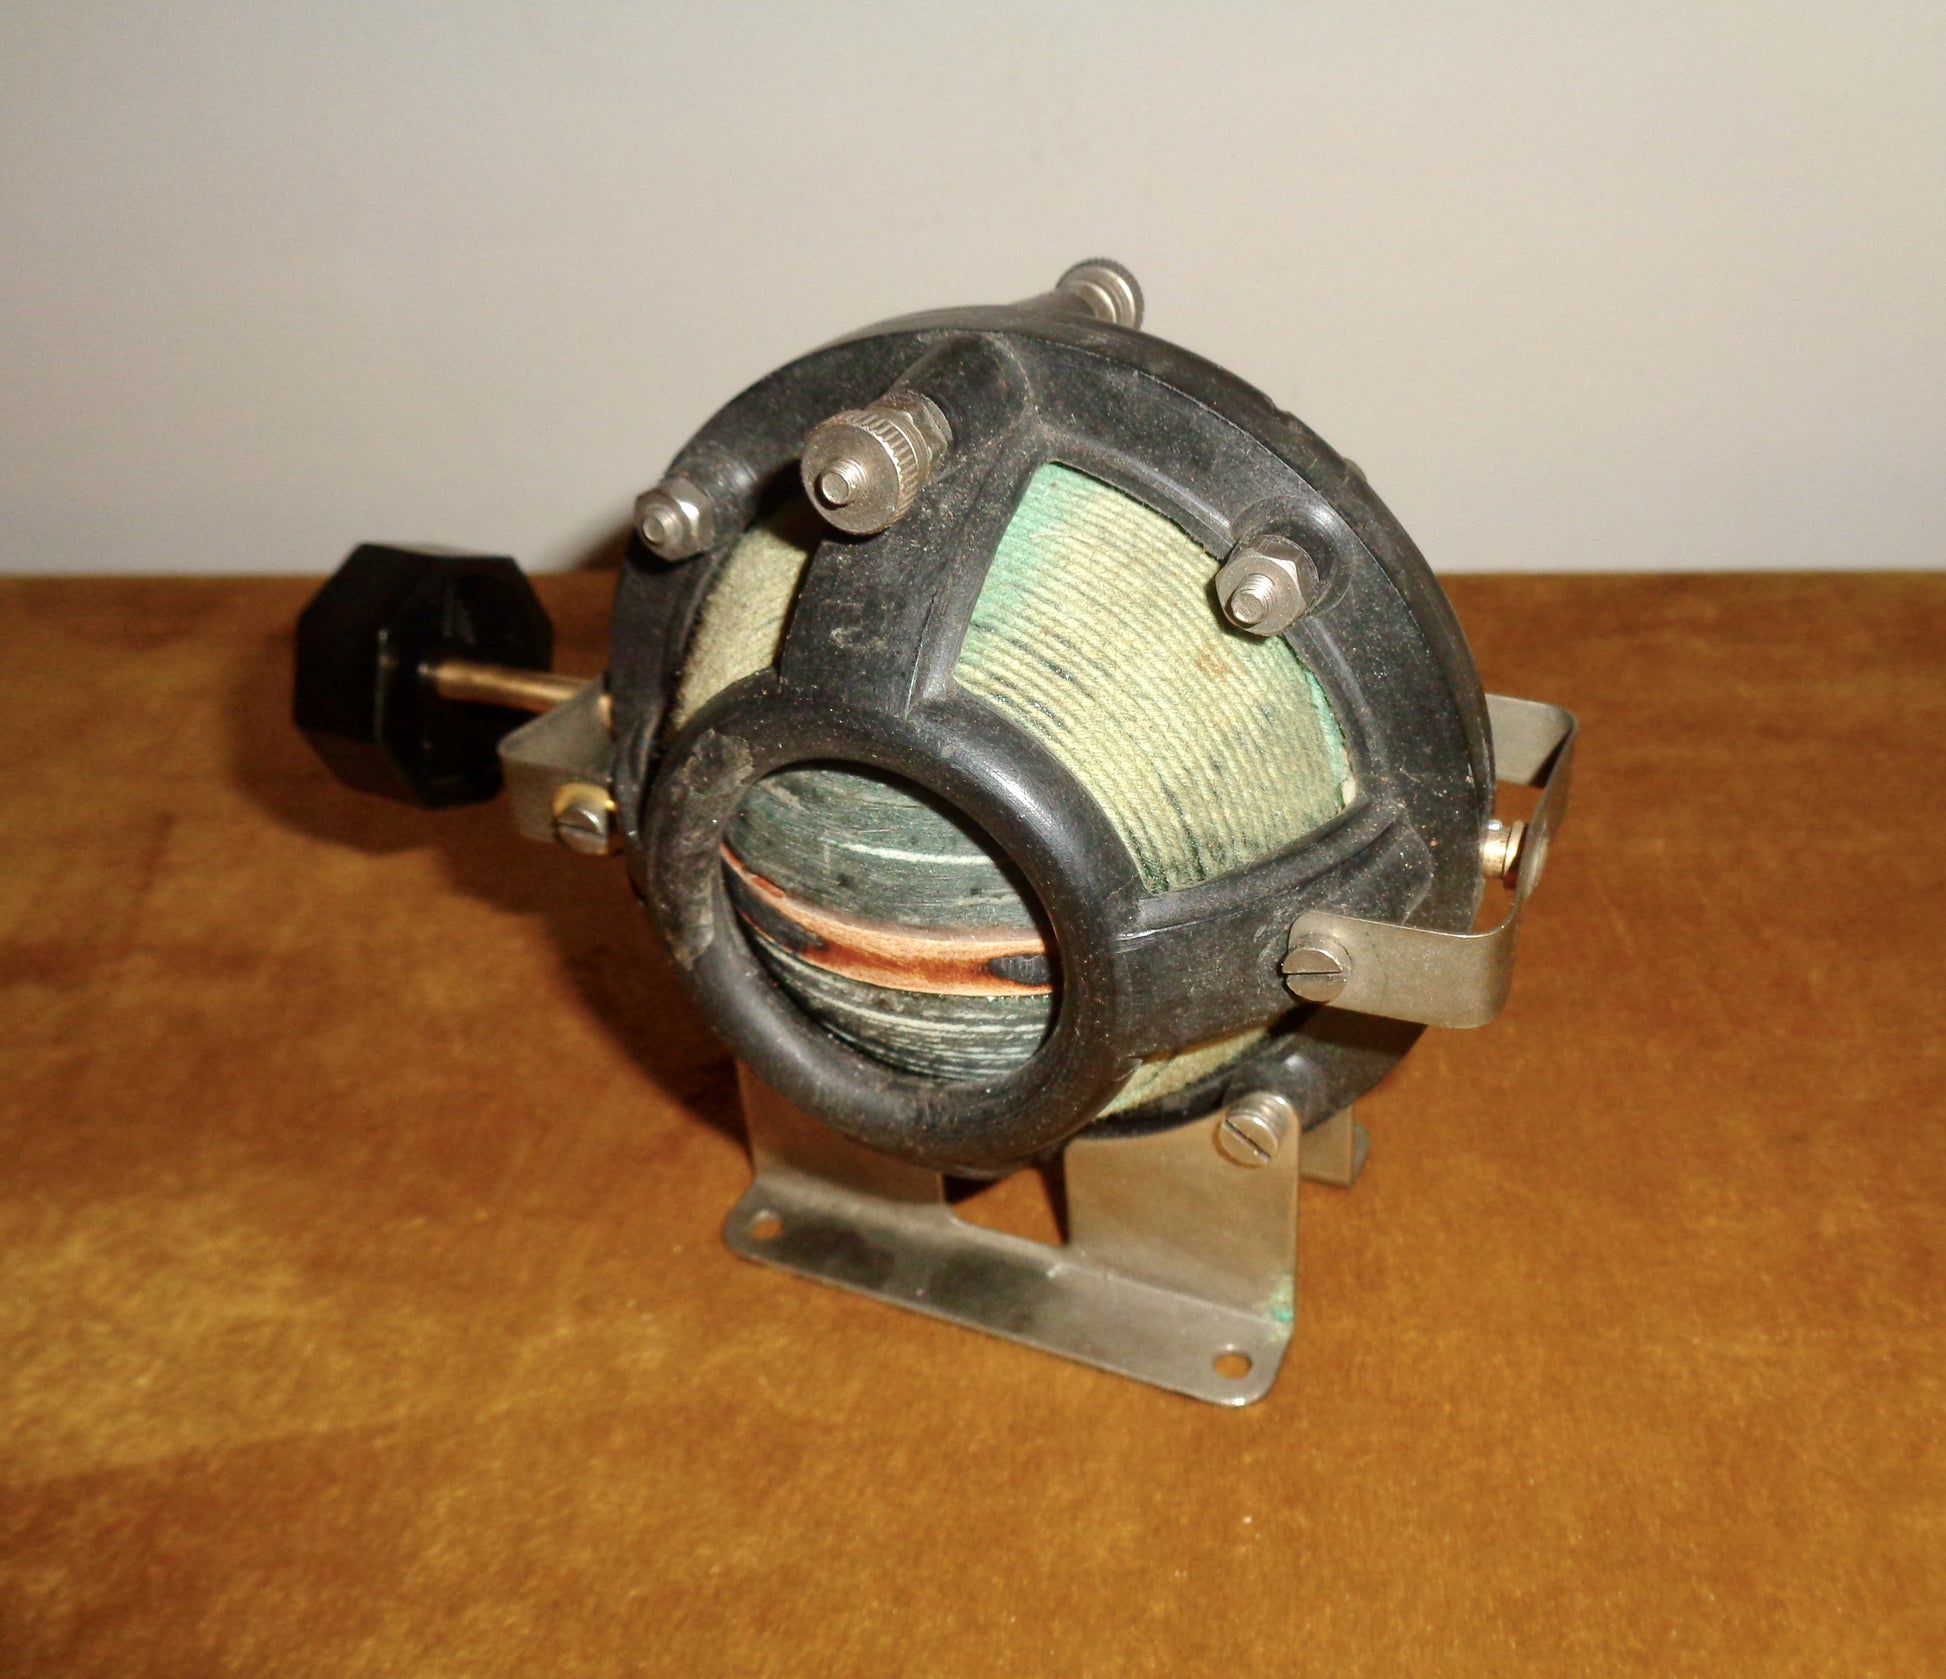 1925 Igranic F Type Aerial Tuning Variometer For A Crystal Radio. Registered Number 708773